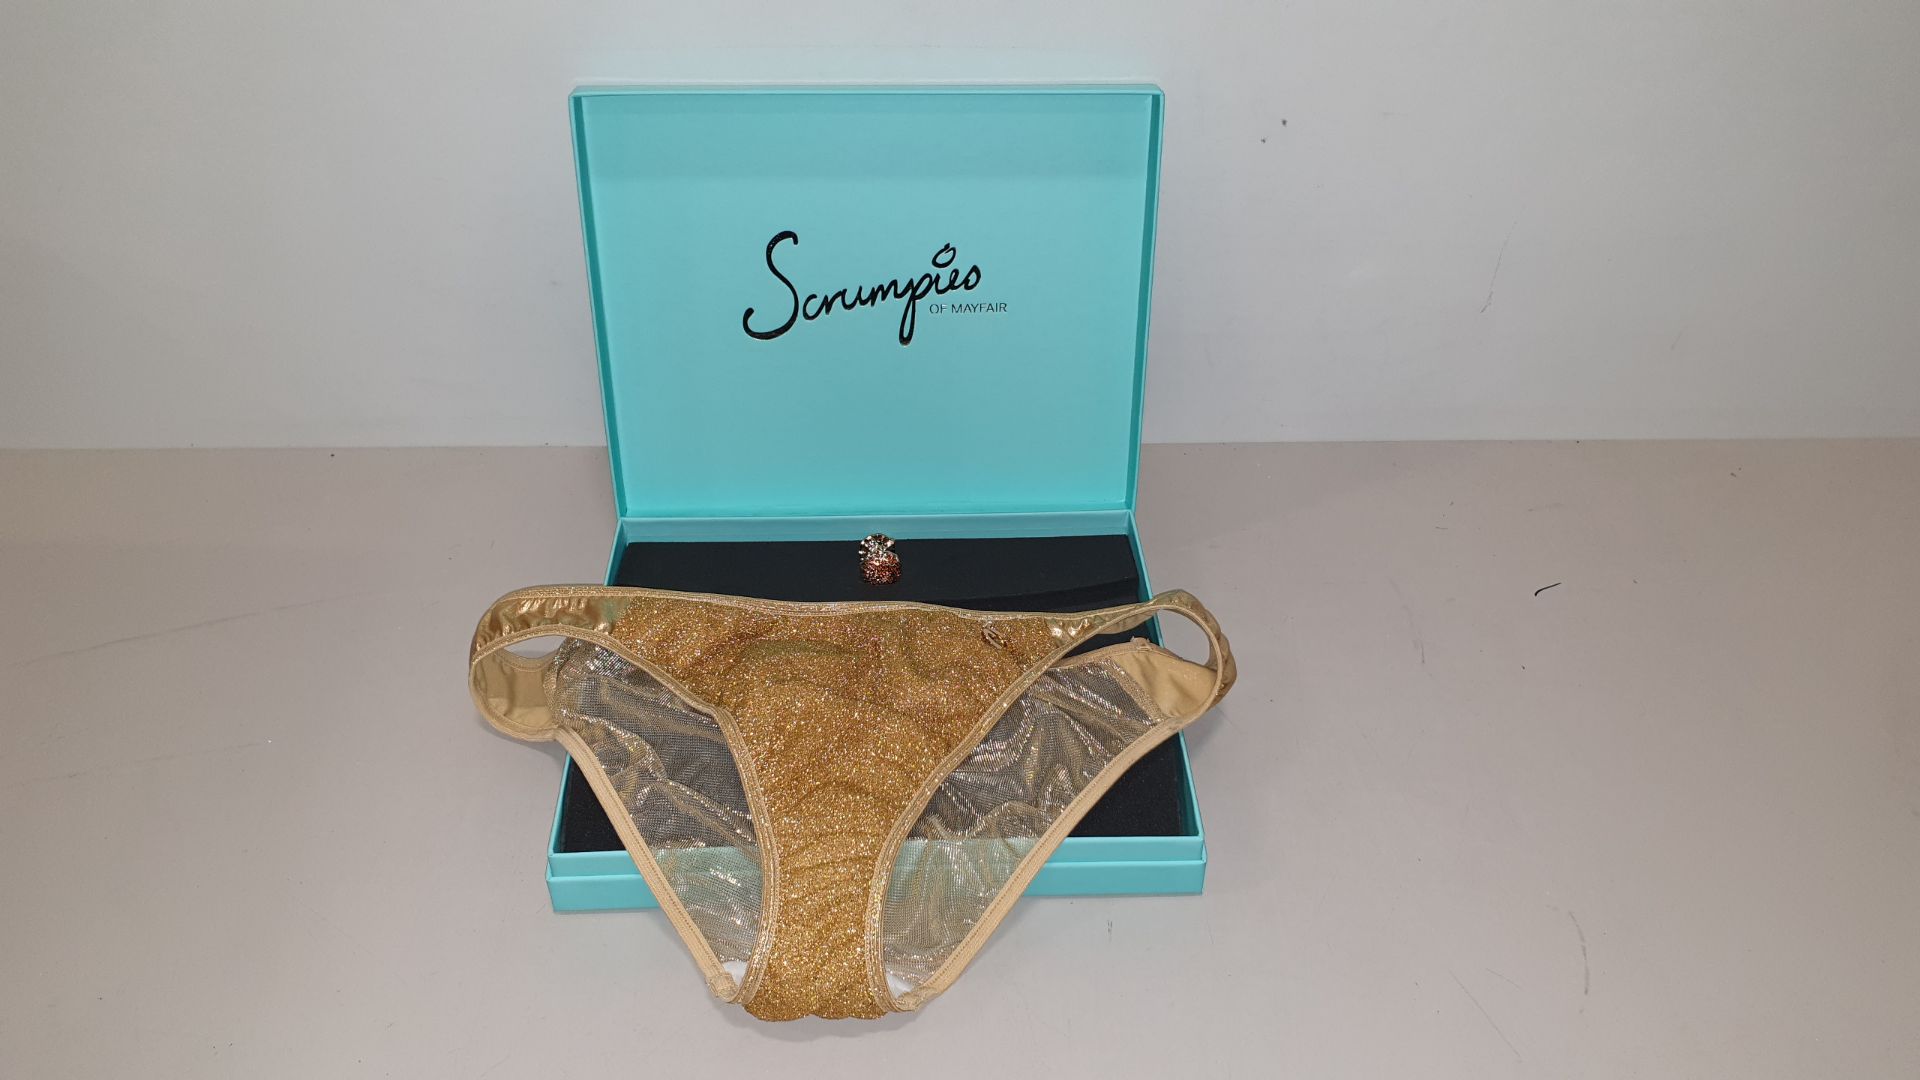 50 X SCRUMPIES OF MAYFAIR GOLDEN DELICIOUS TANGA BRIEFS - SIZES 8-16 (1-5) 10 OF EACH WITH BAG OF 50